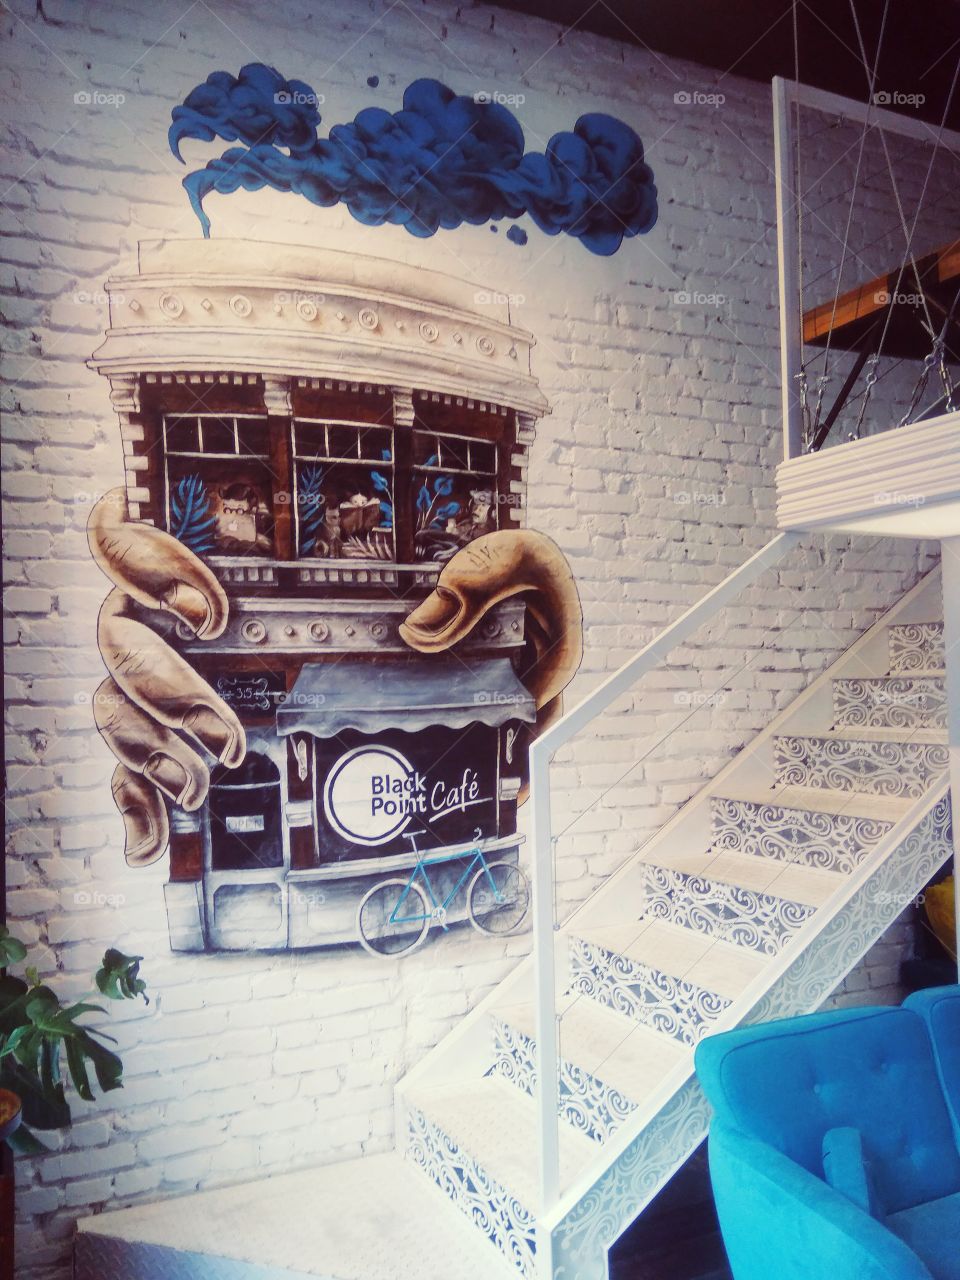 One of the best designs for a coffee place, I've ever seen!

Black Point Cafe, Wrocław